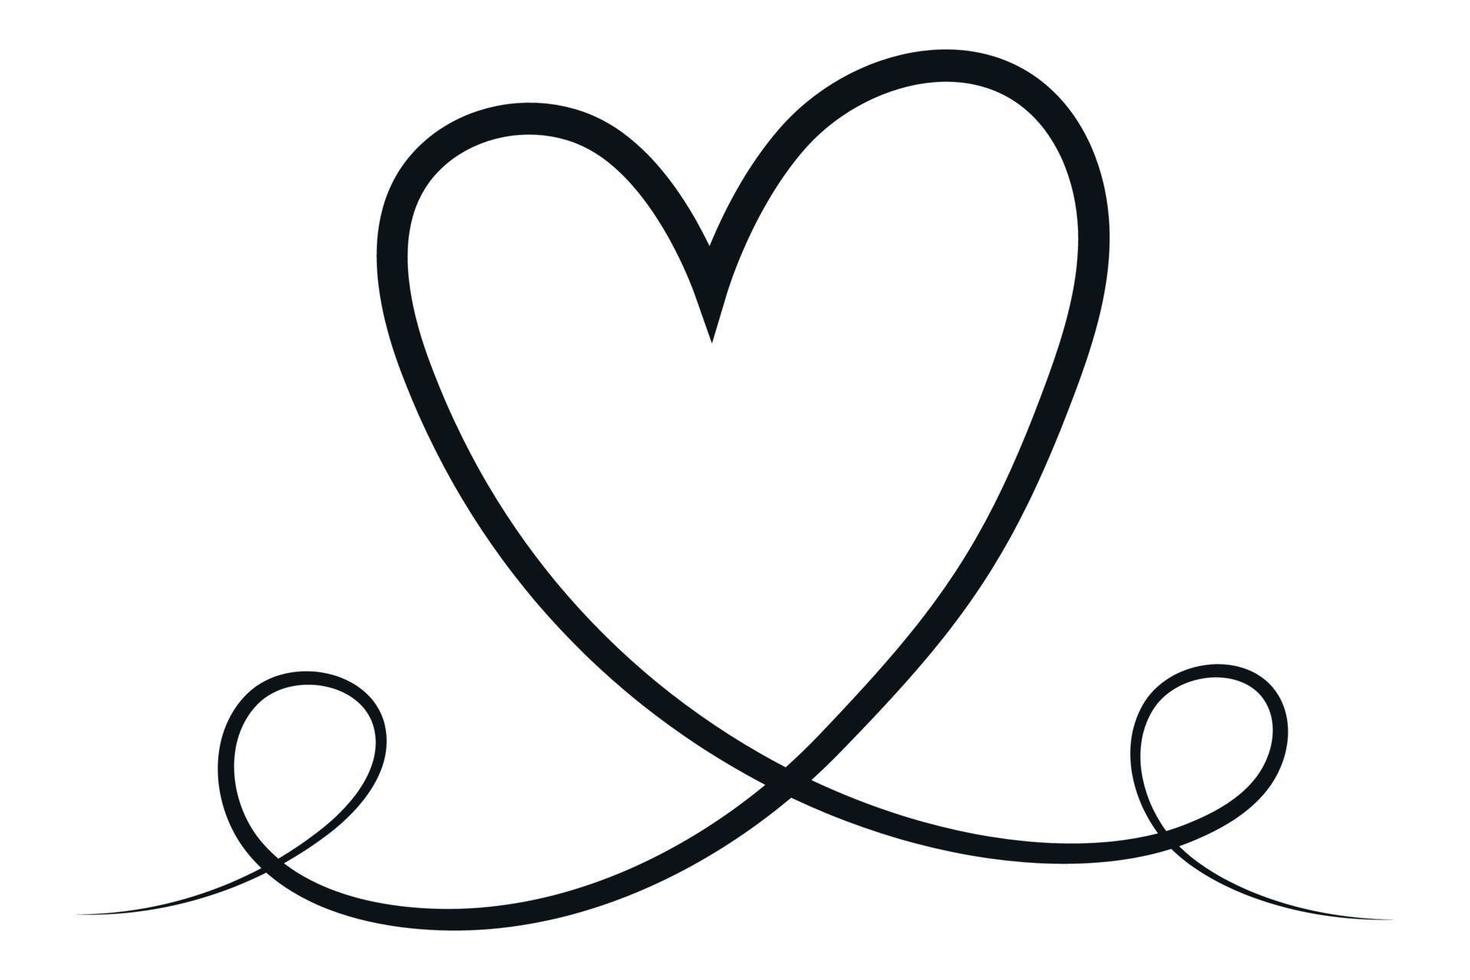 Curley Hand Drawn Line Heart vector